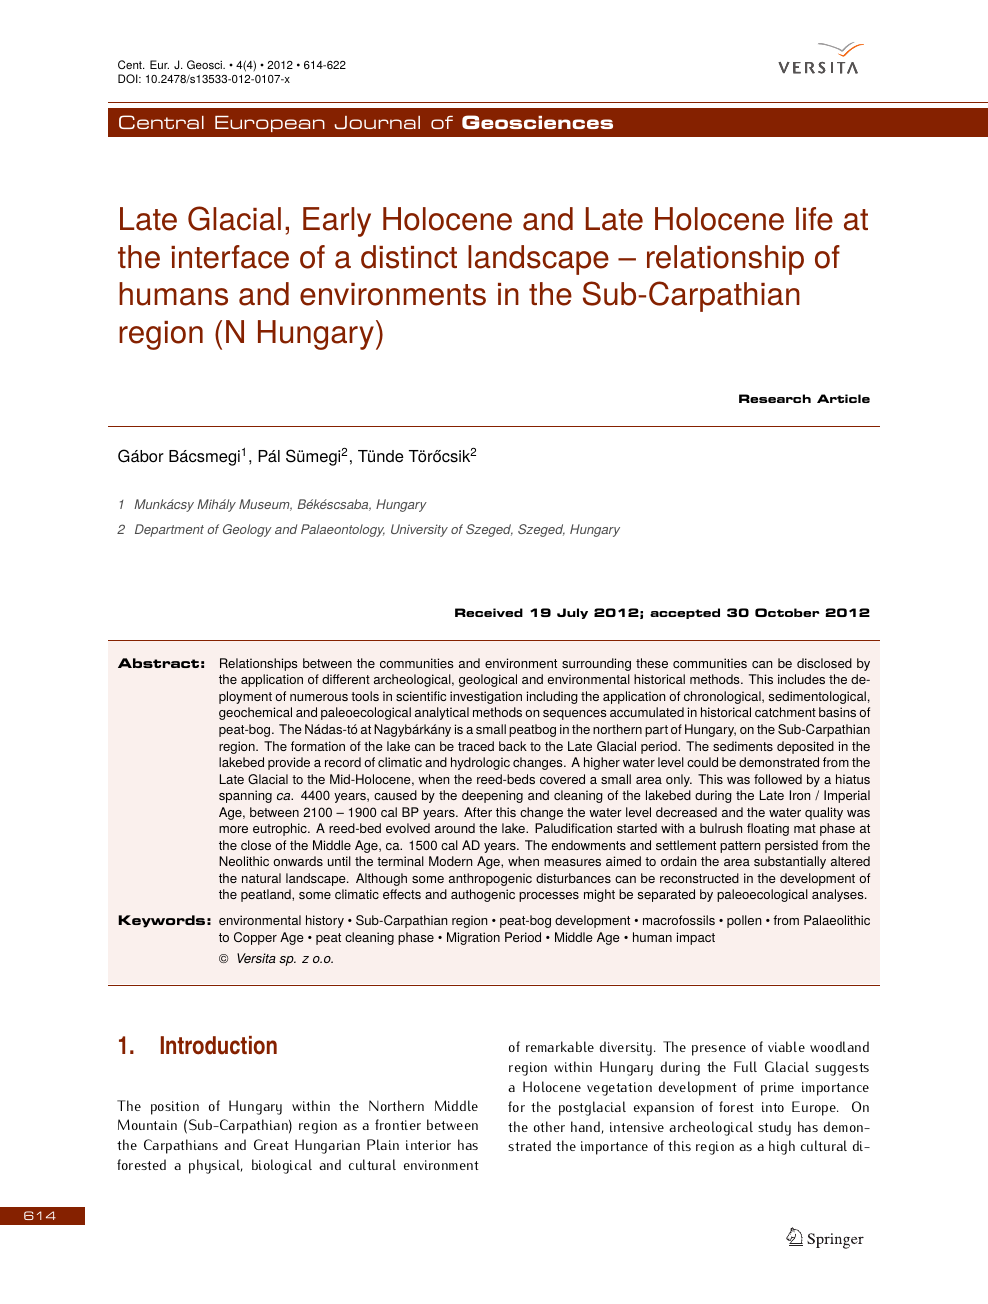 Lateglacial–Holocene environments and human occupation in the